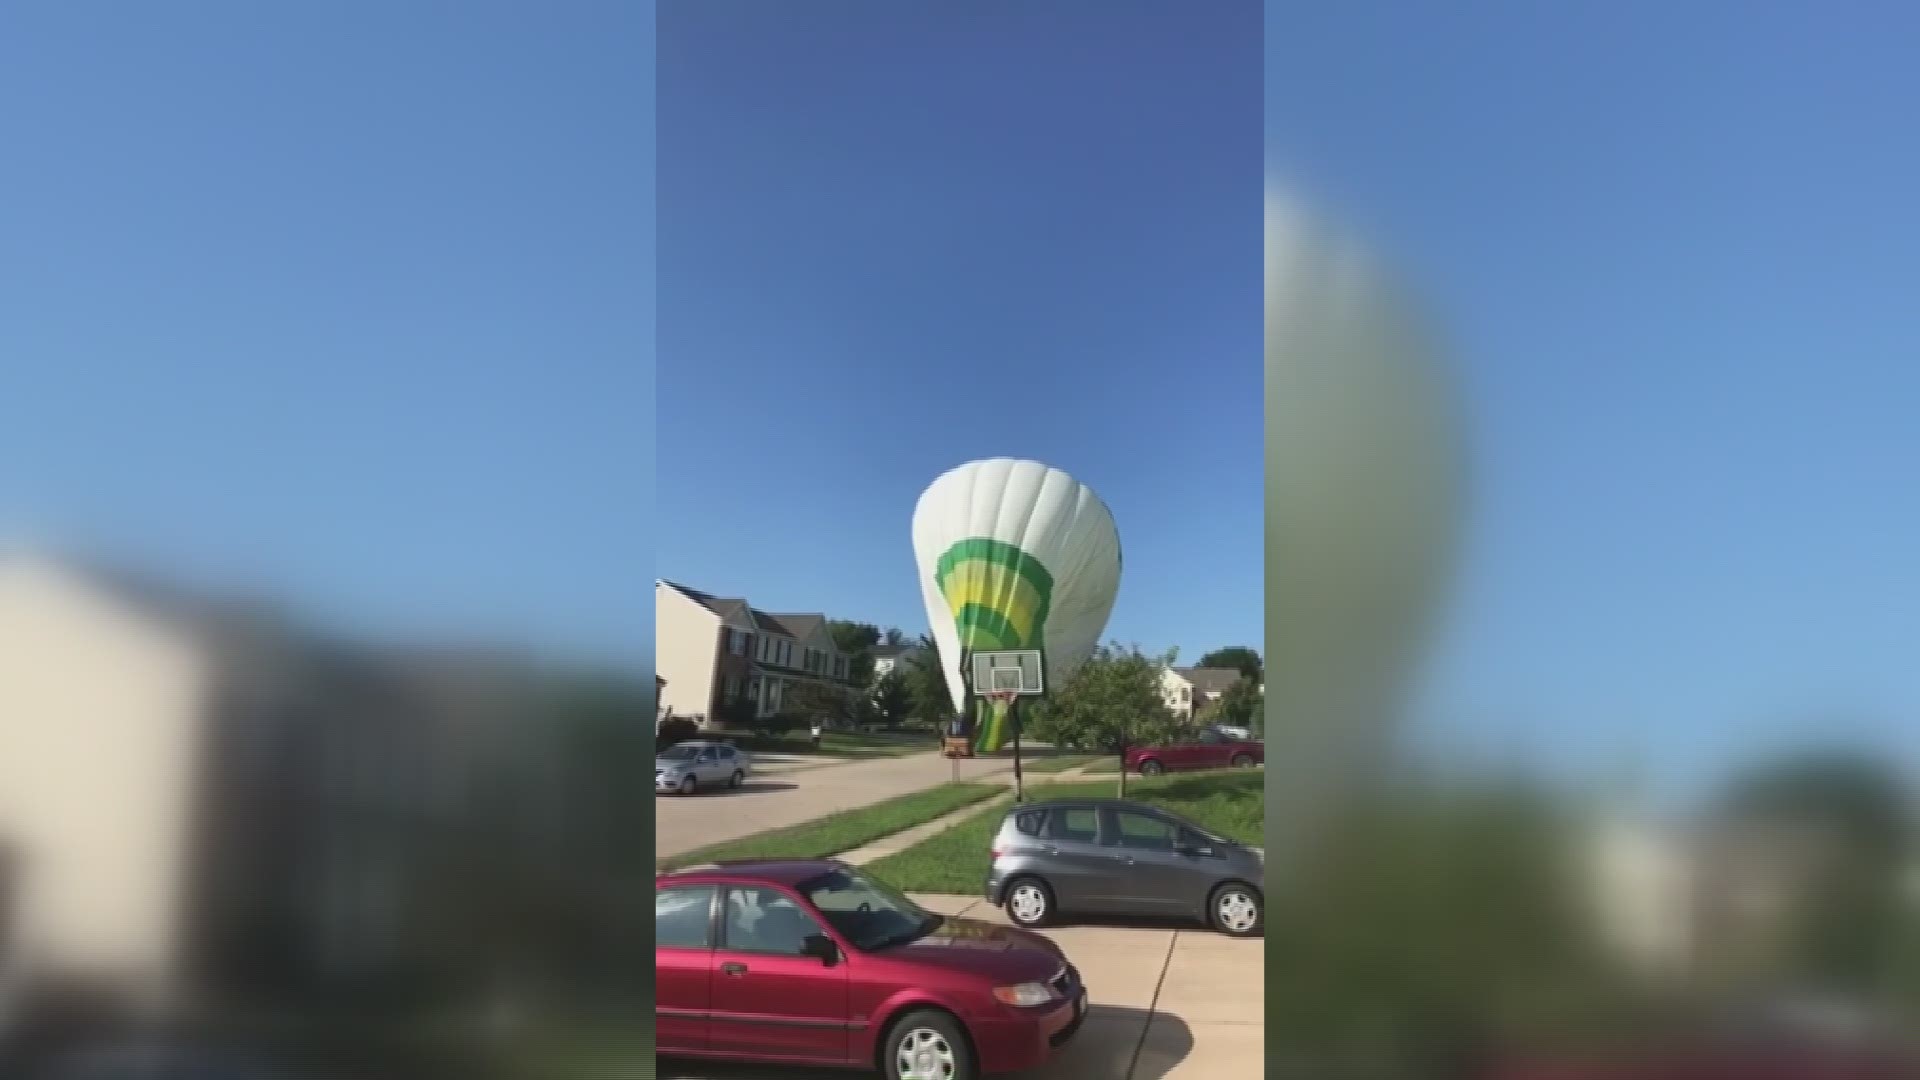 Photos and videos sent to 5 On Your Side show a large green, white and yellow hot air balloon sitting in the middle of a neighborhood street.